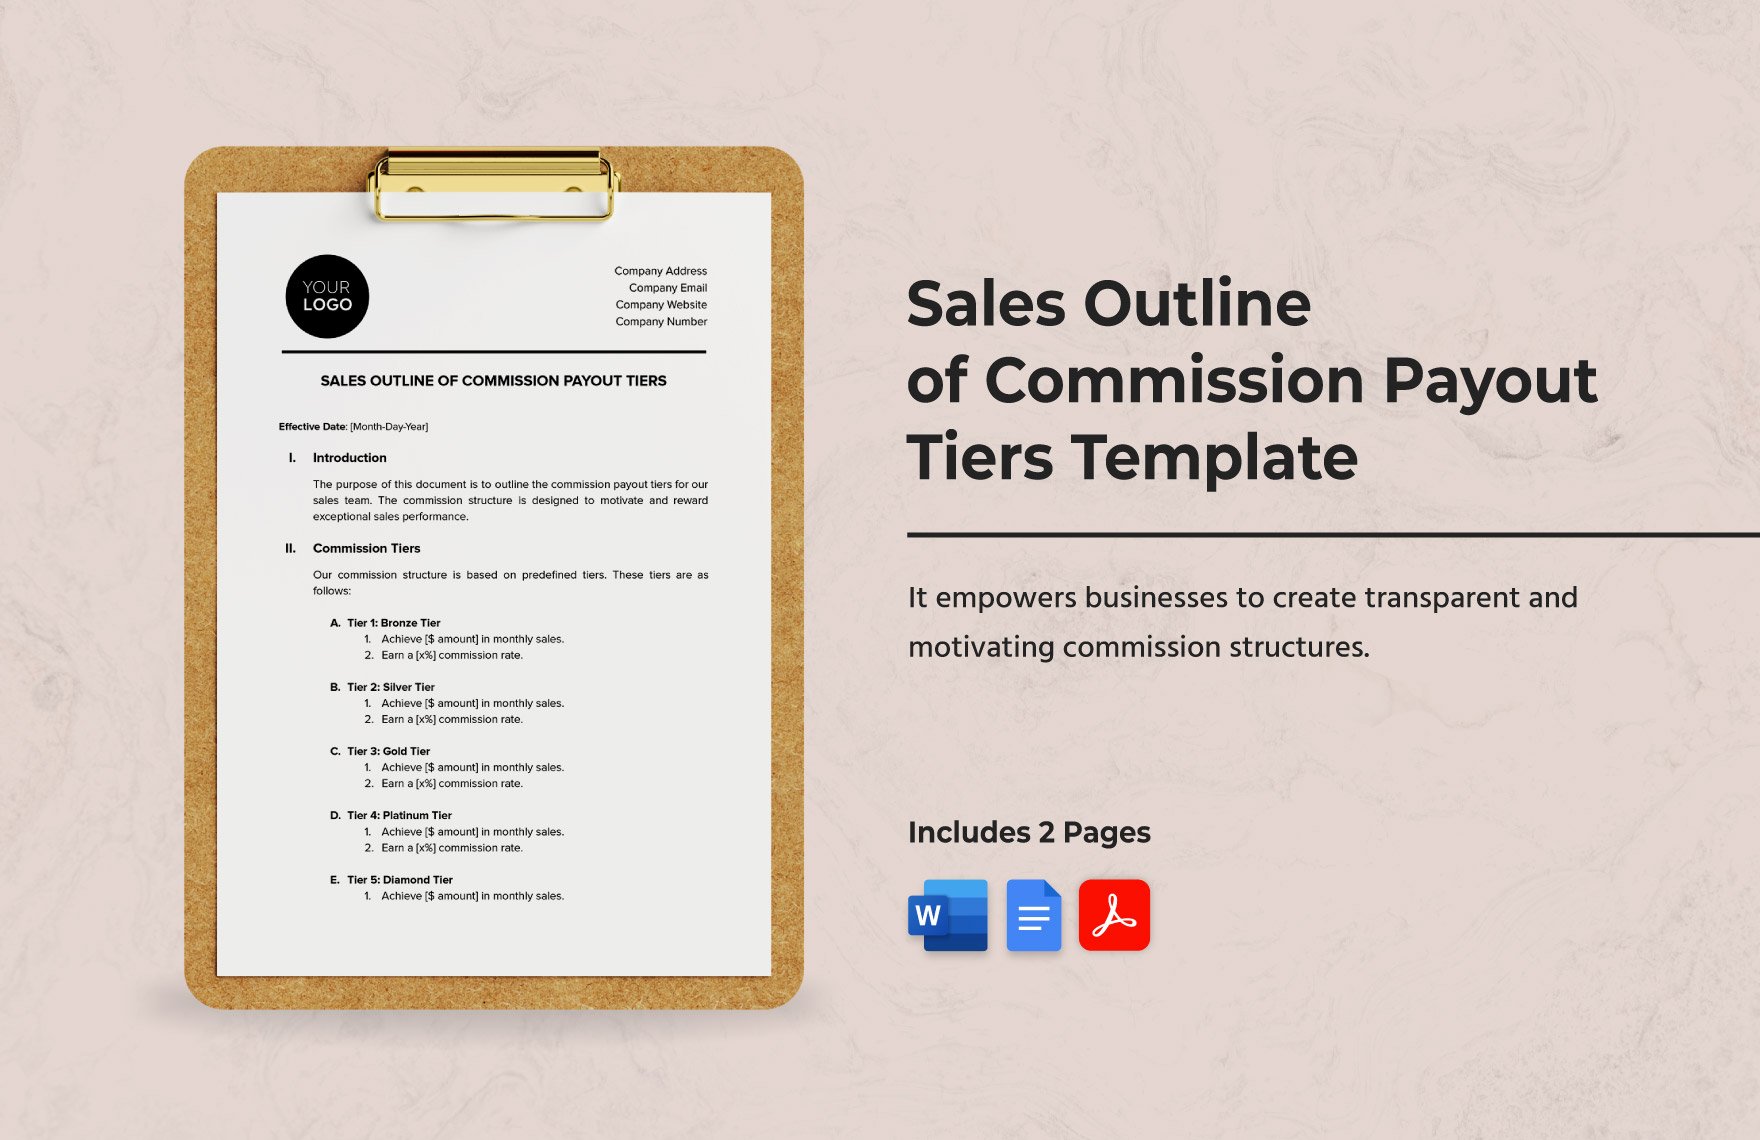 Sales Outline of Commission Payout Tiers Template in Word, Google Docs, PDF